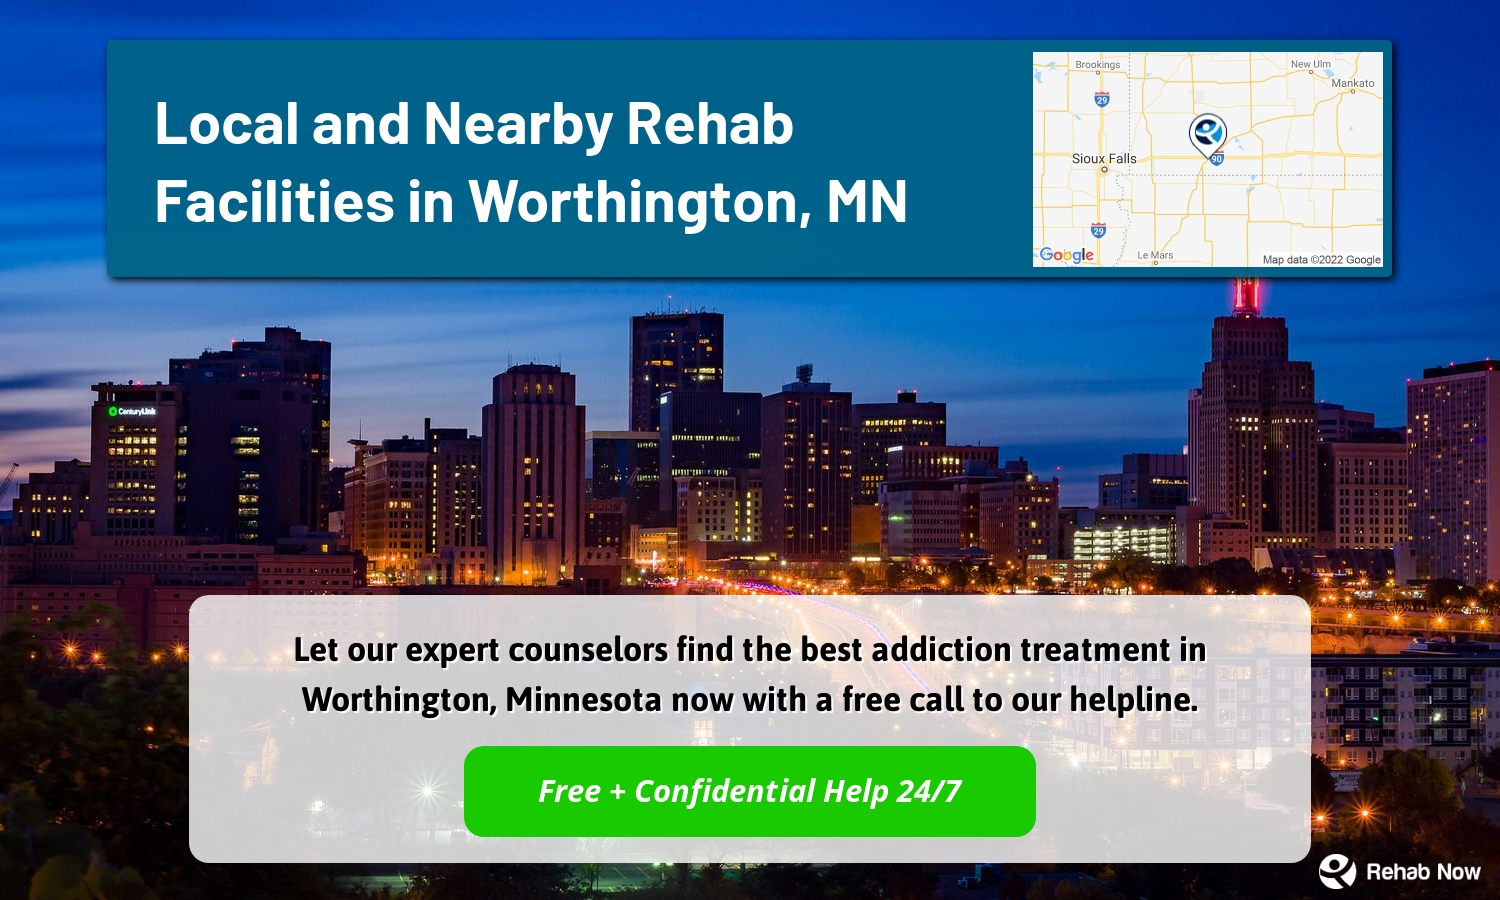 Let our expert counselors find the best addiction treatment in Worthington, Minnesota now with a free call to our helpline.